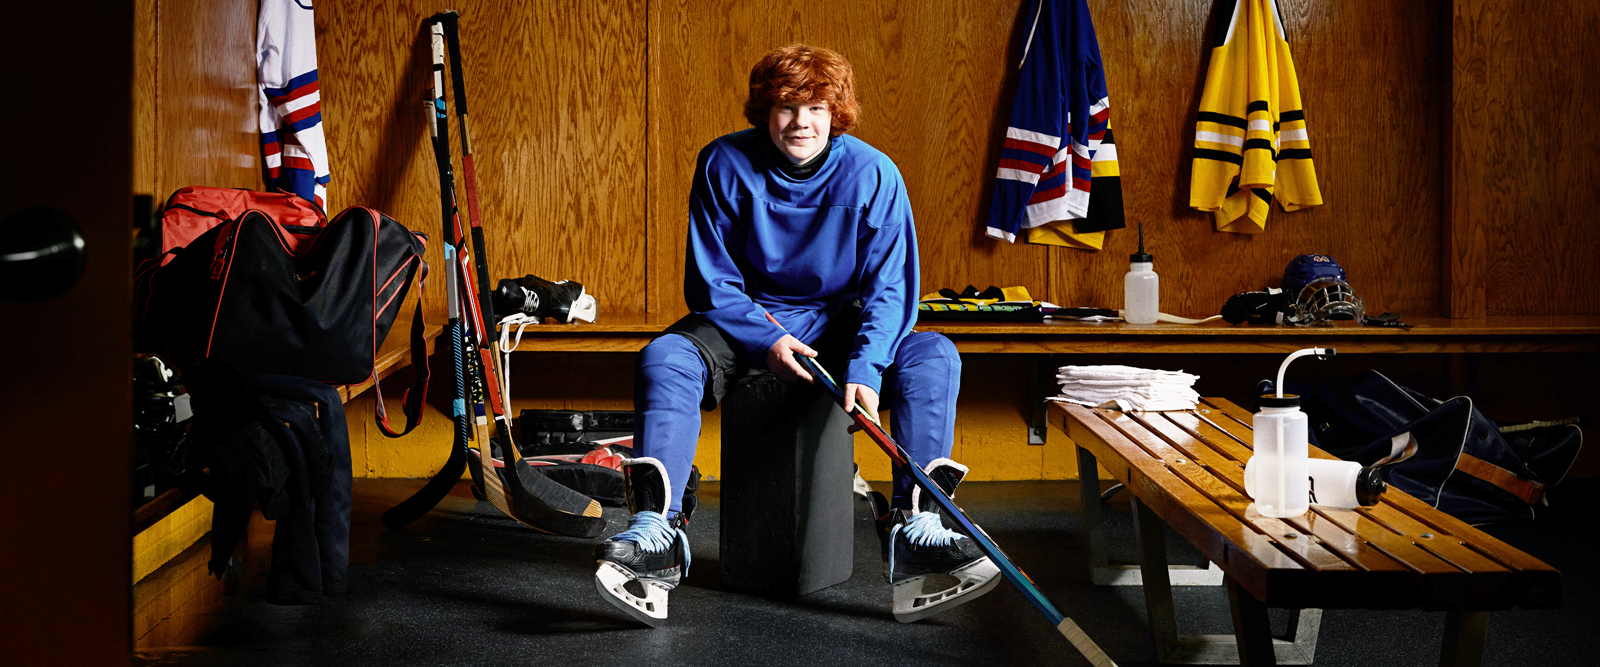 Jack Foley getting suited up to play hockey